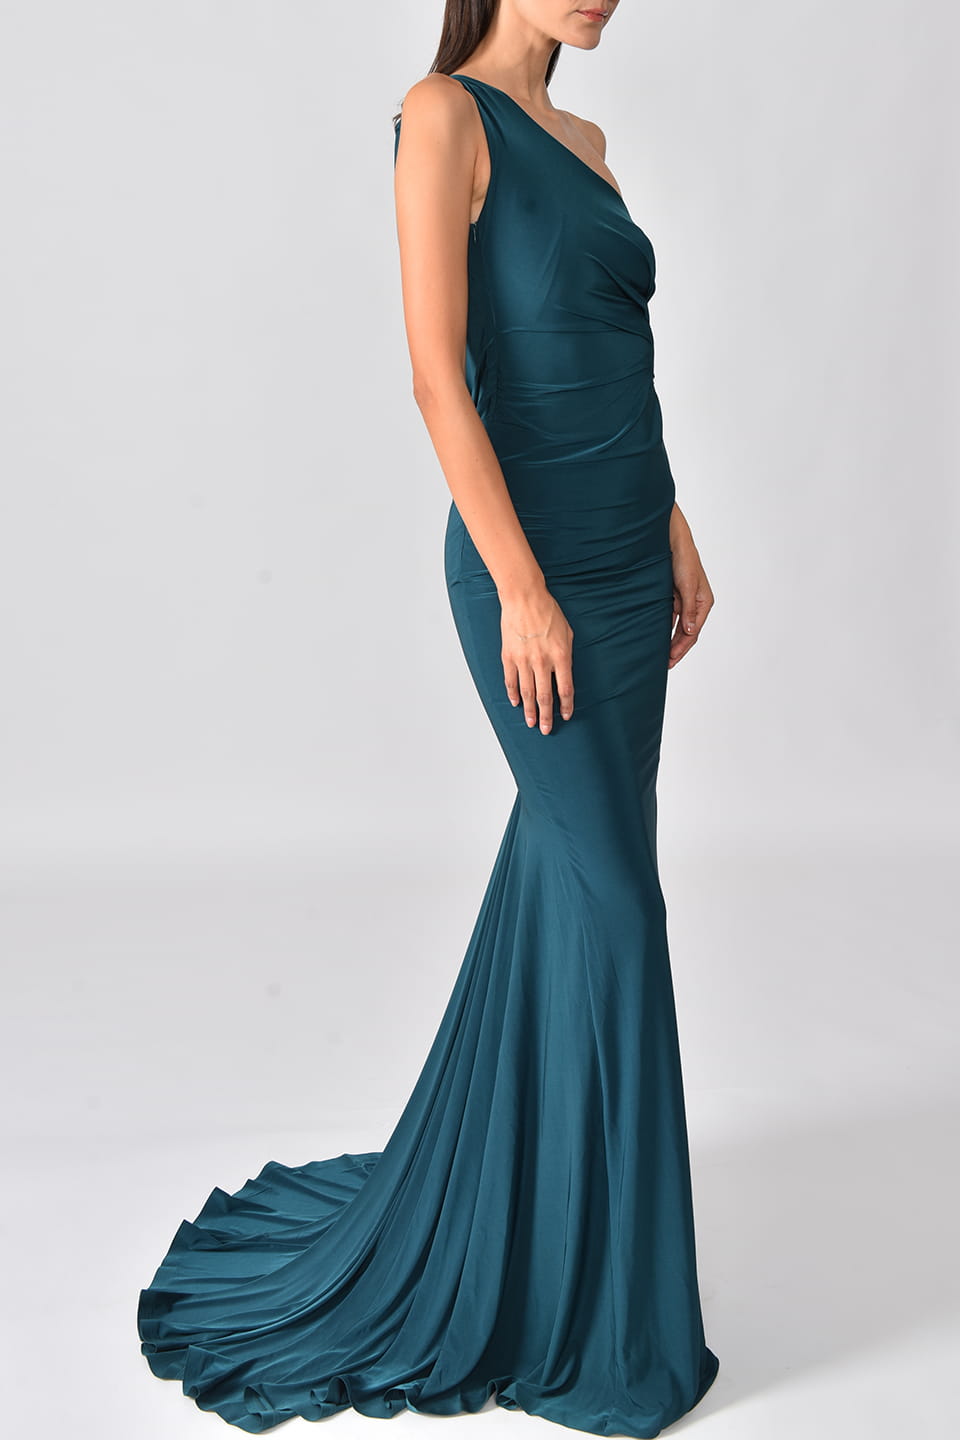 Model wears Special occasion Maxi dress in Petrol Blue color from Hamel fashion stylist, posing on a side